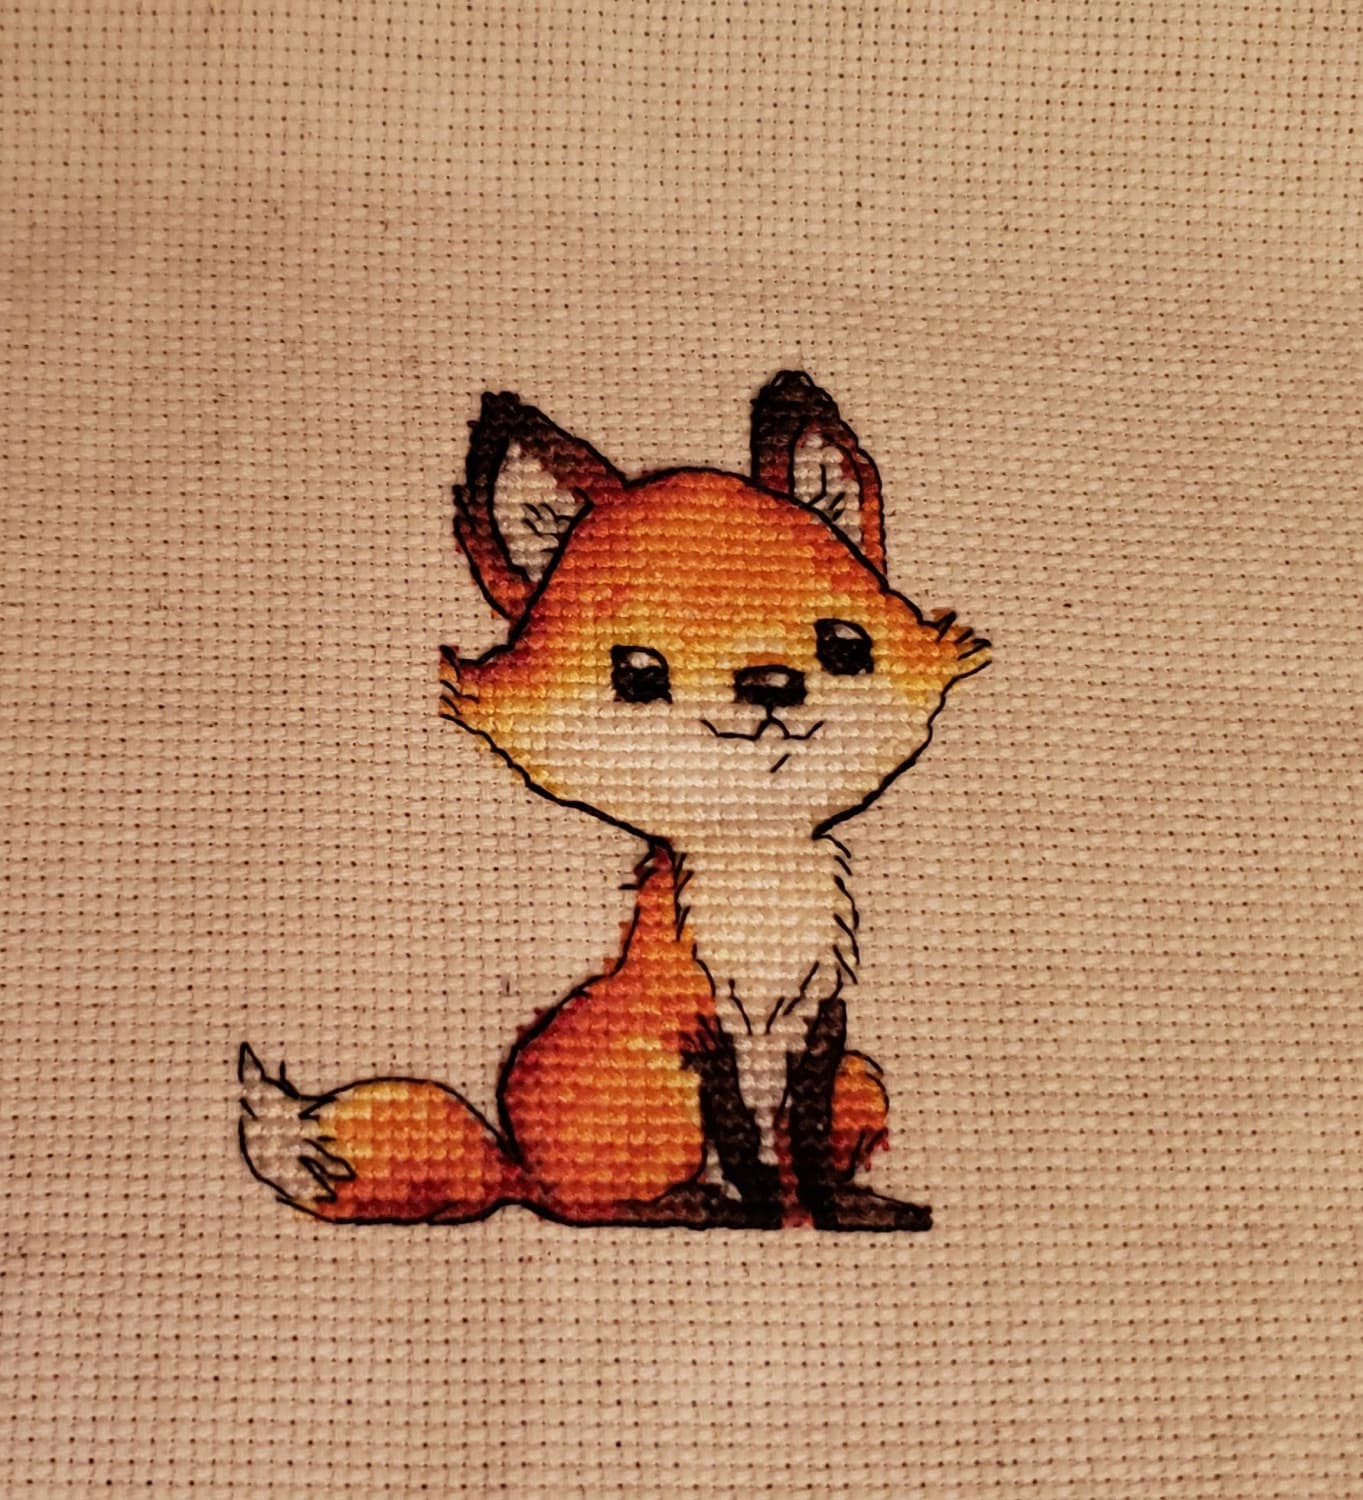 [FO] My first project of 2022! My lil foxy!! I'm sad she's done, but now my fiancé is going to help me pick out a frame so she can be my stitching buddy. Now onto my next fox. I might submit this one to the state fair contest... Pattern is by HakabaDesign on Etsy